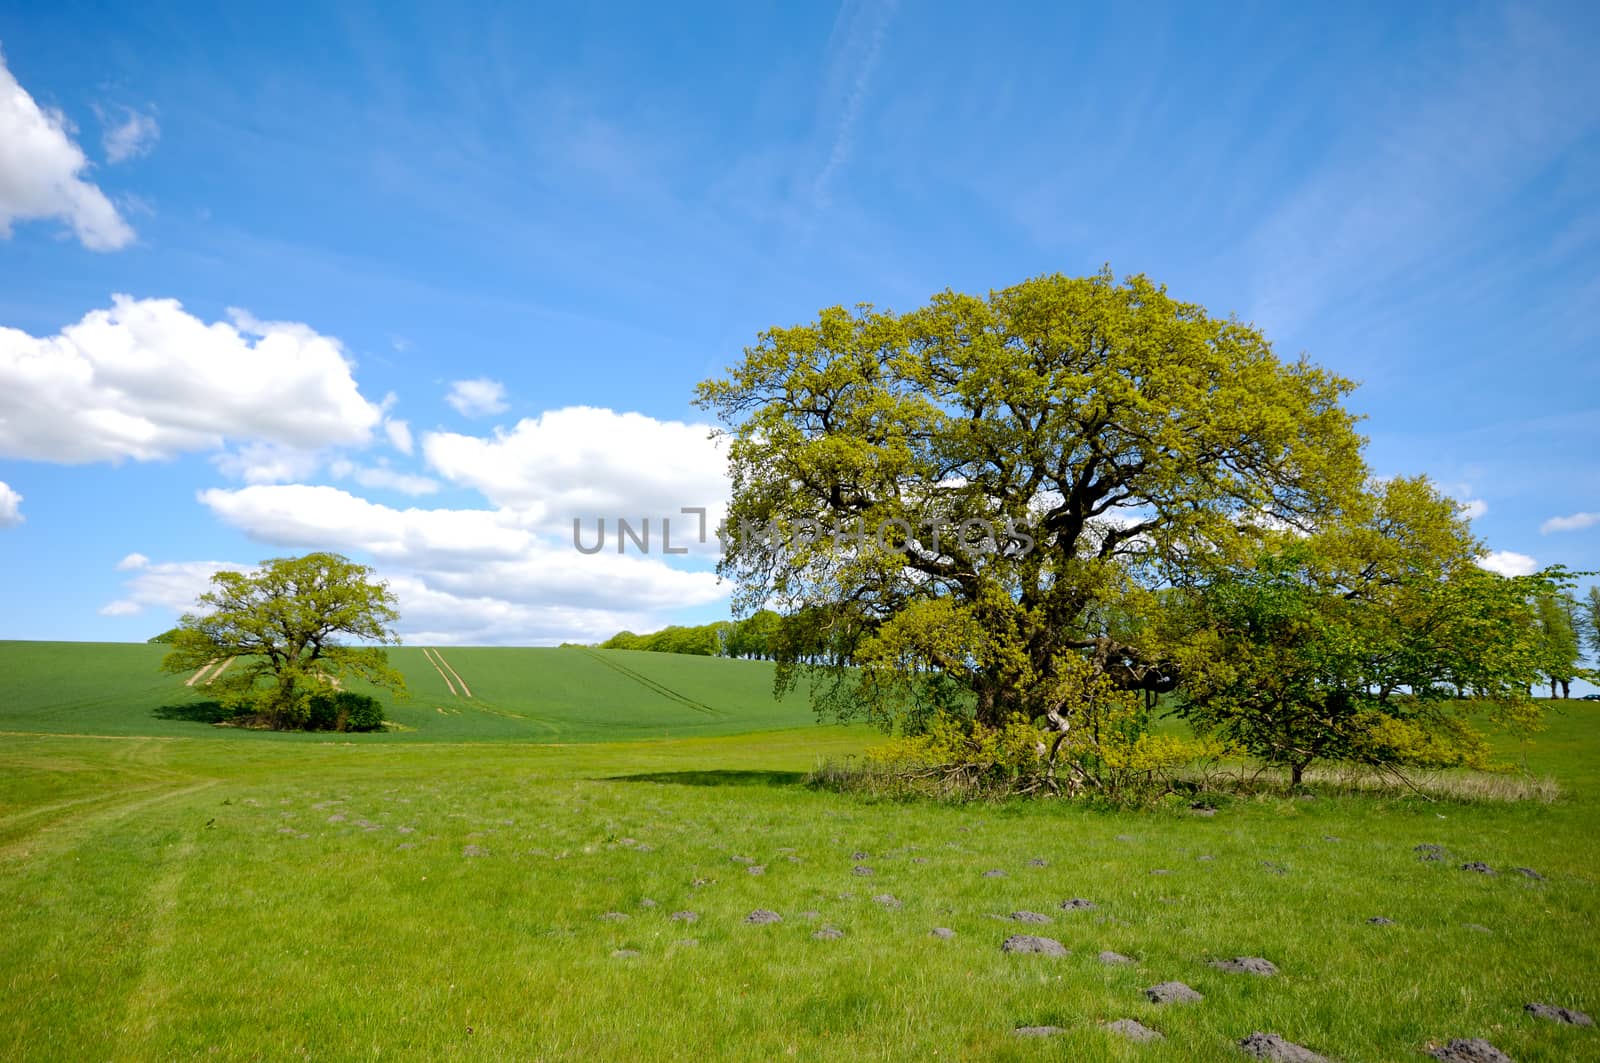 Landscape with a tree on a hill. The sky is blue with white clouds.